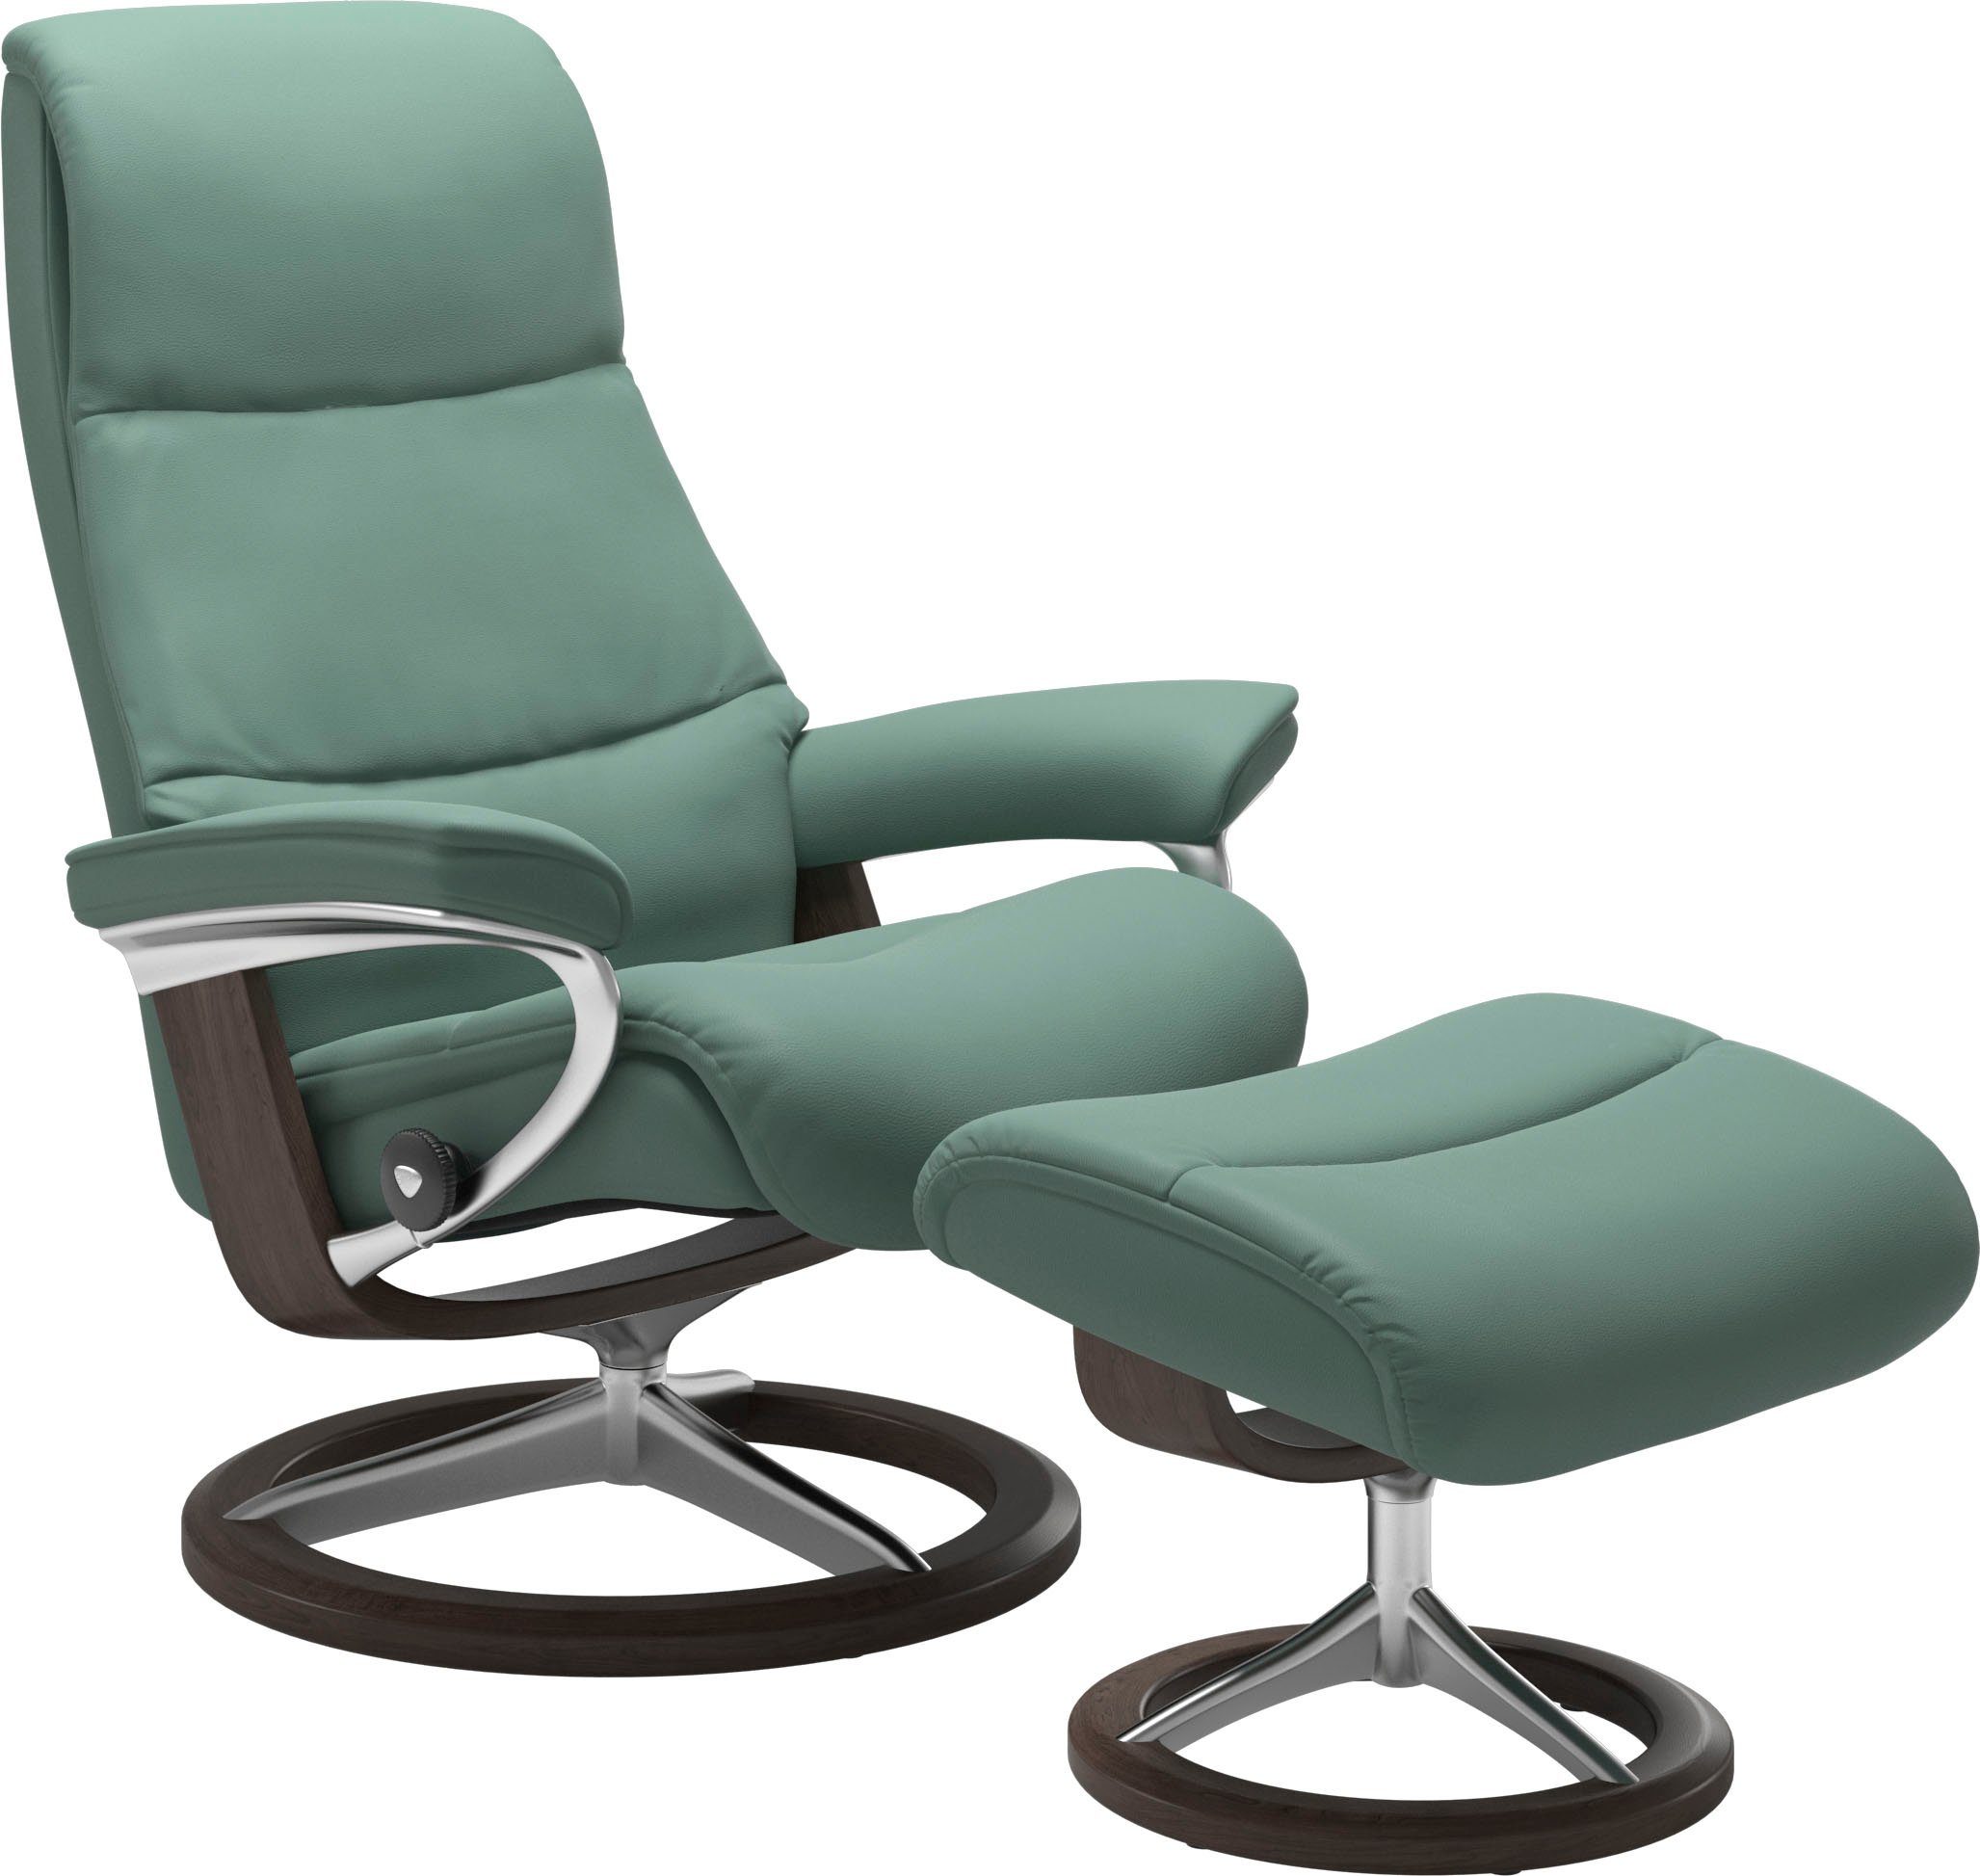 Stressless® Relaxsessel View, mit Signature Base, Größe L,Gestell Wenge